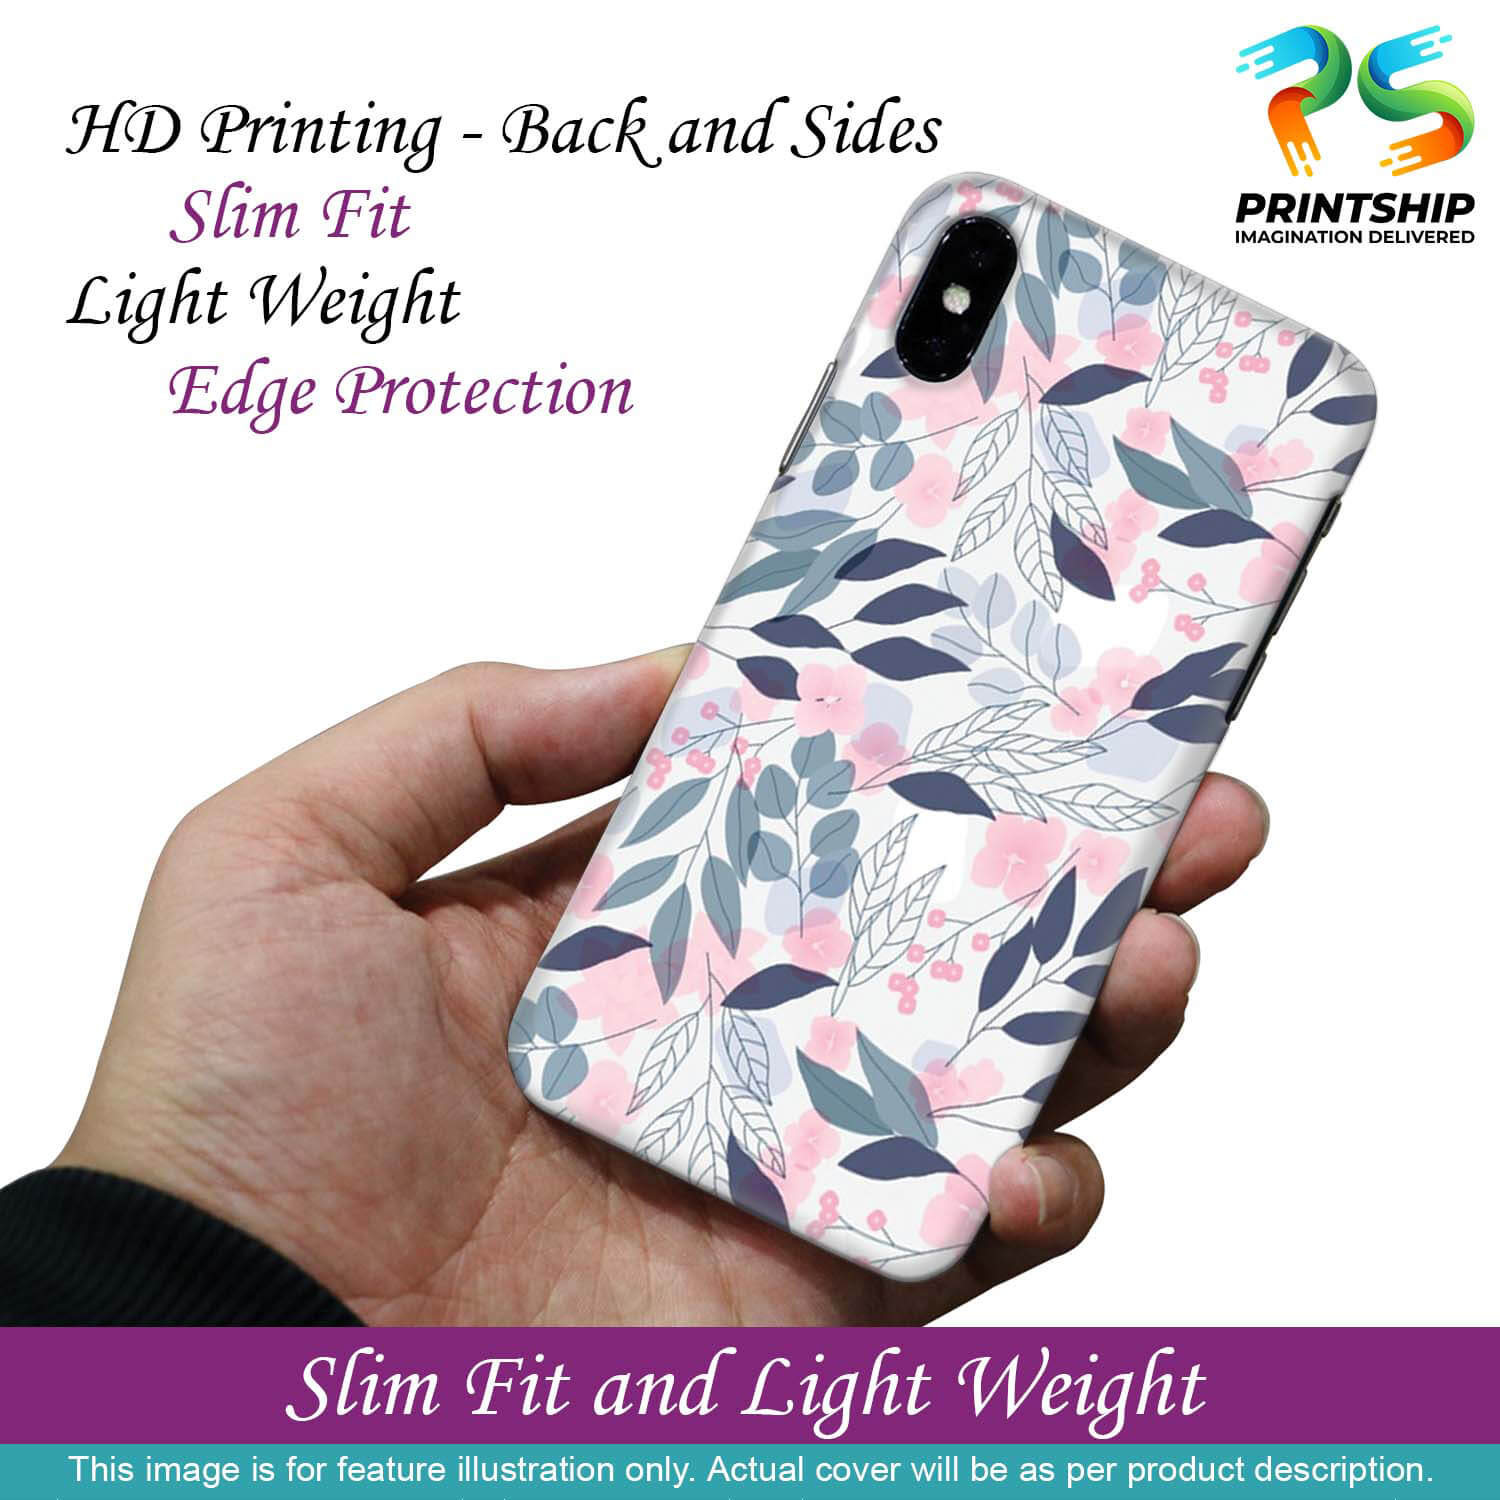 PS1333-Flowery Patterns Back Cover for Samsung Galaxy A9 (2018)